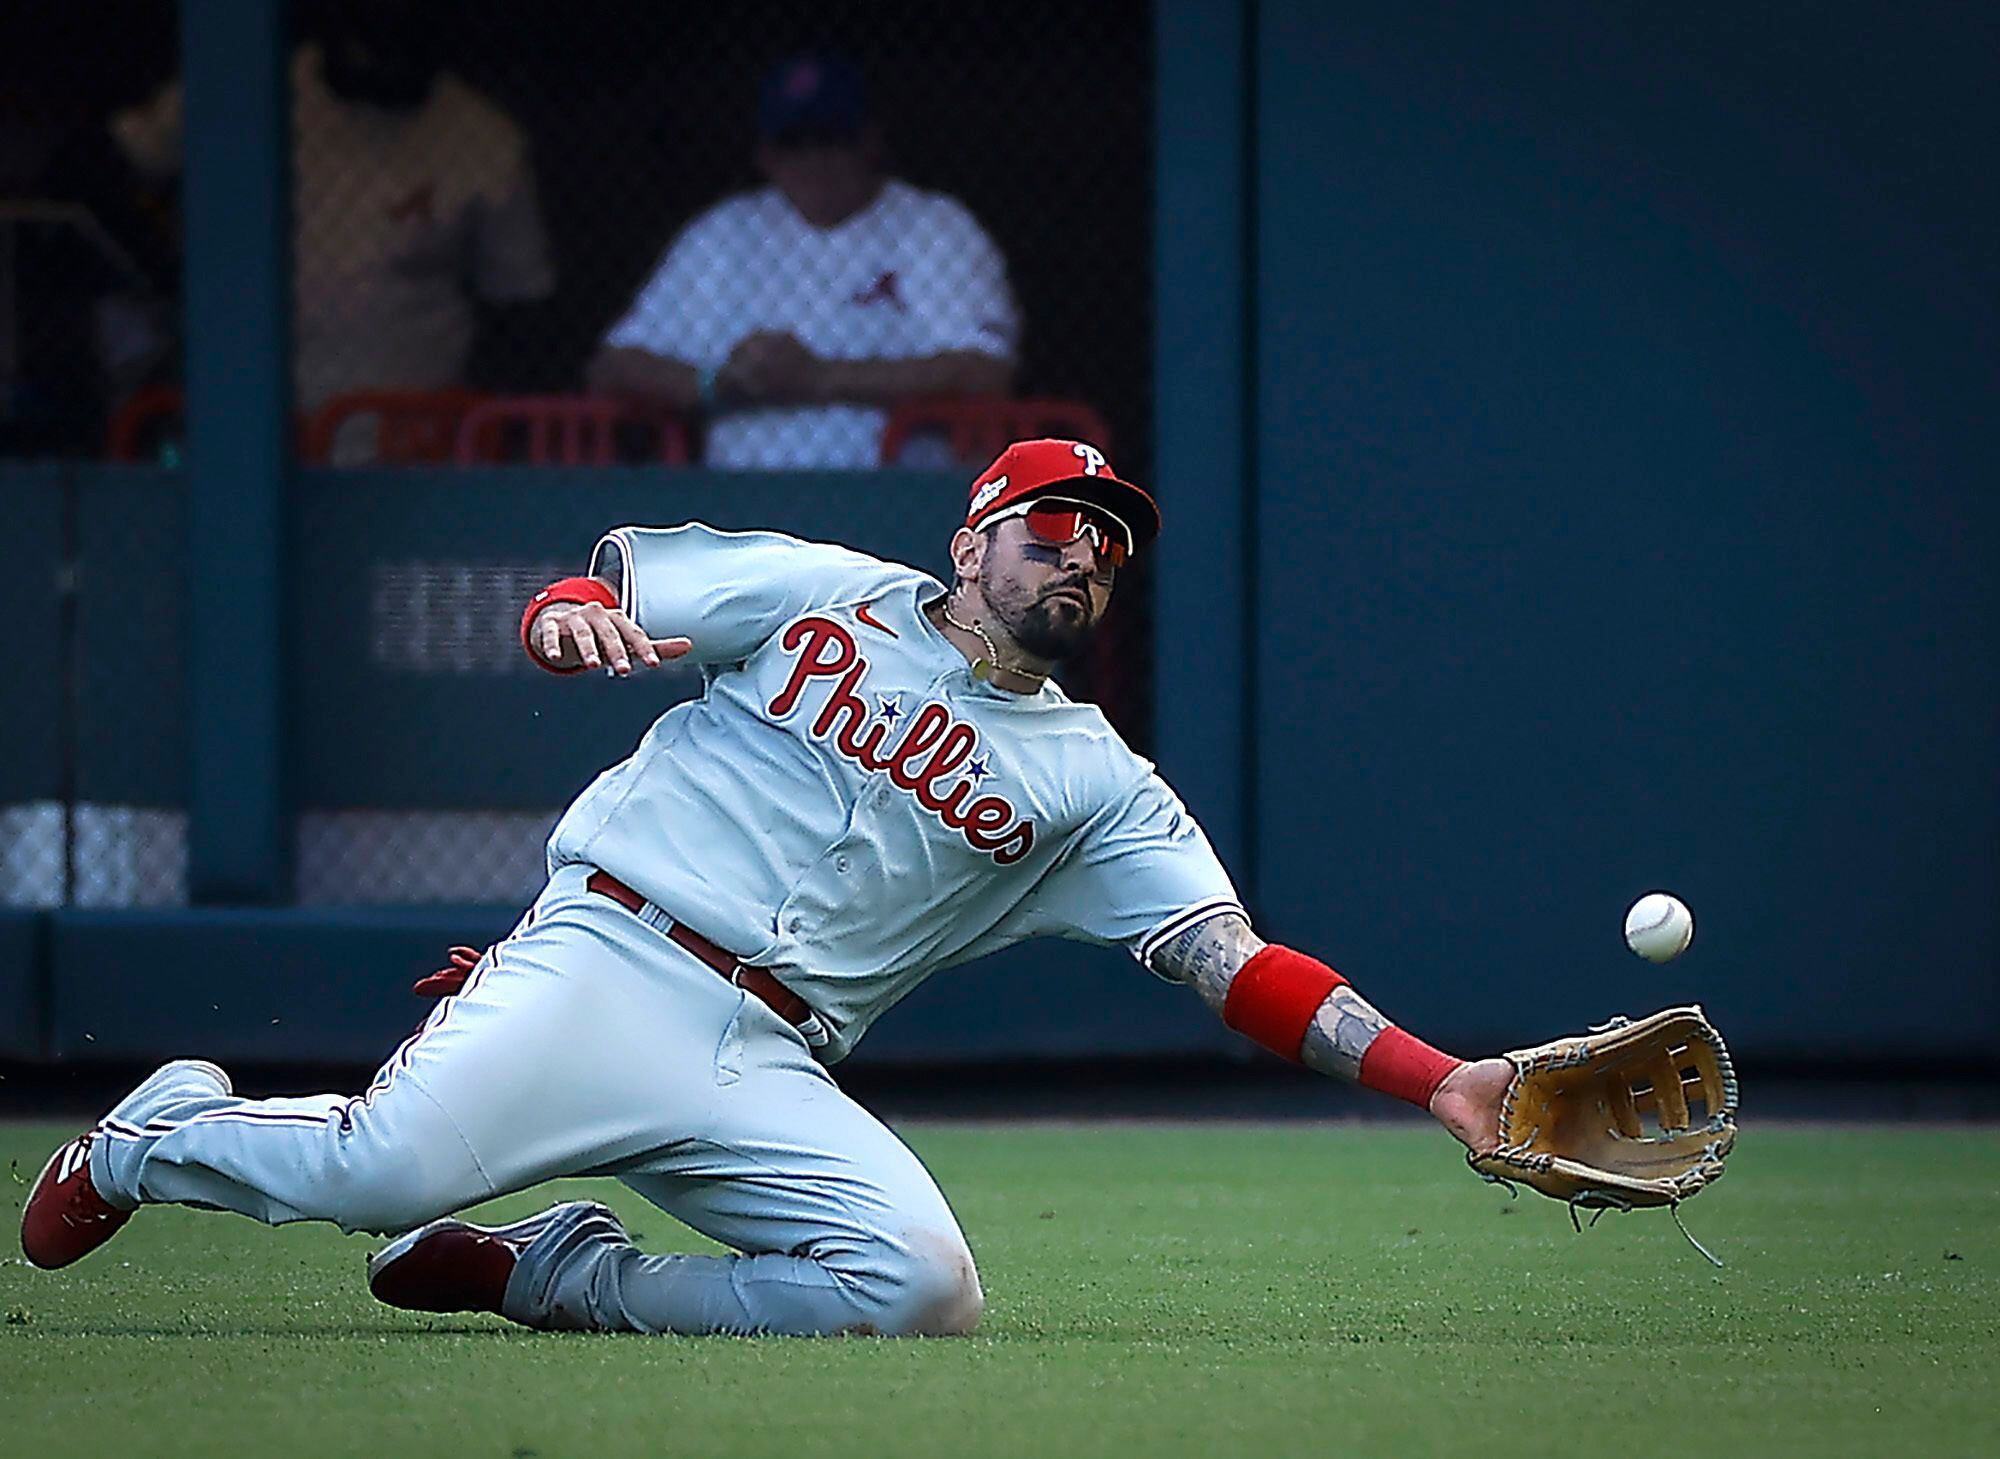 Phillies Notebook: Deep dive into Seranthony Dominguez's injury offers  positive outlook – Delco Times